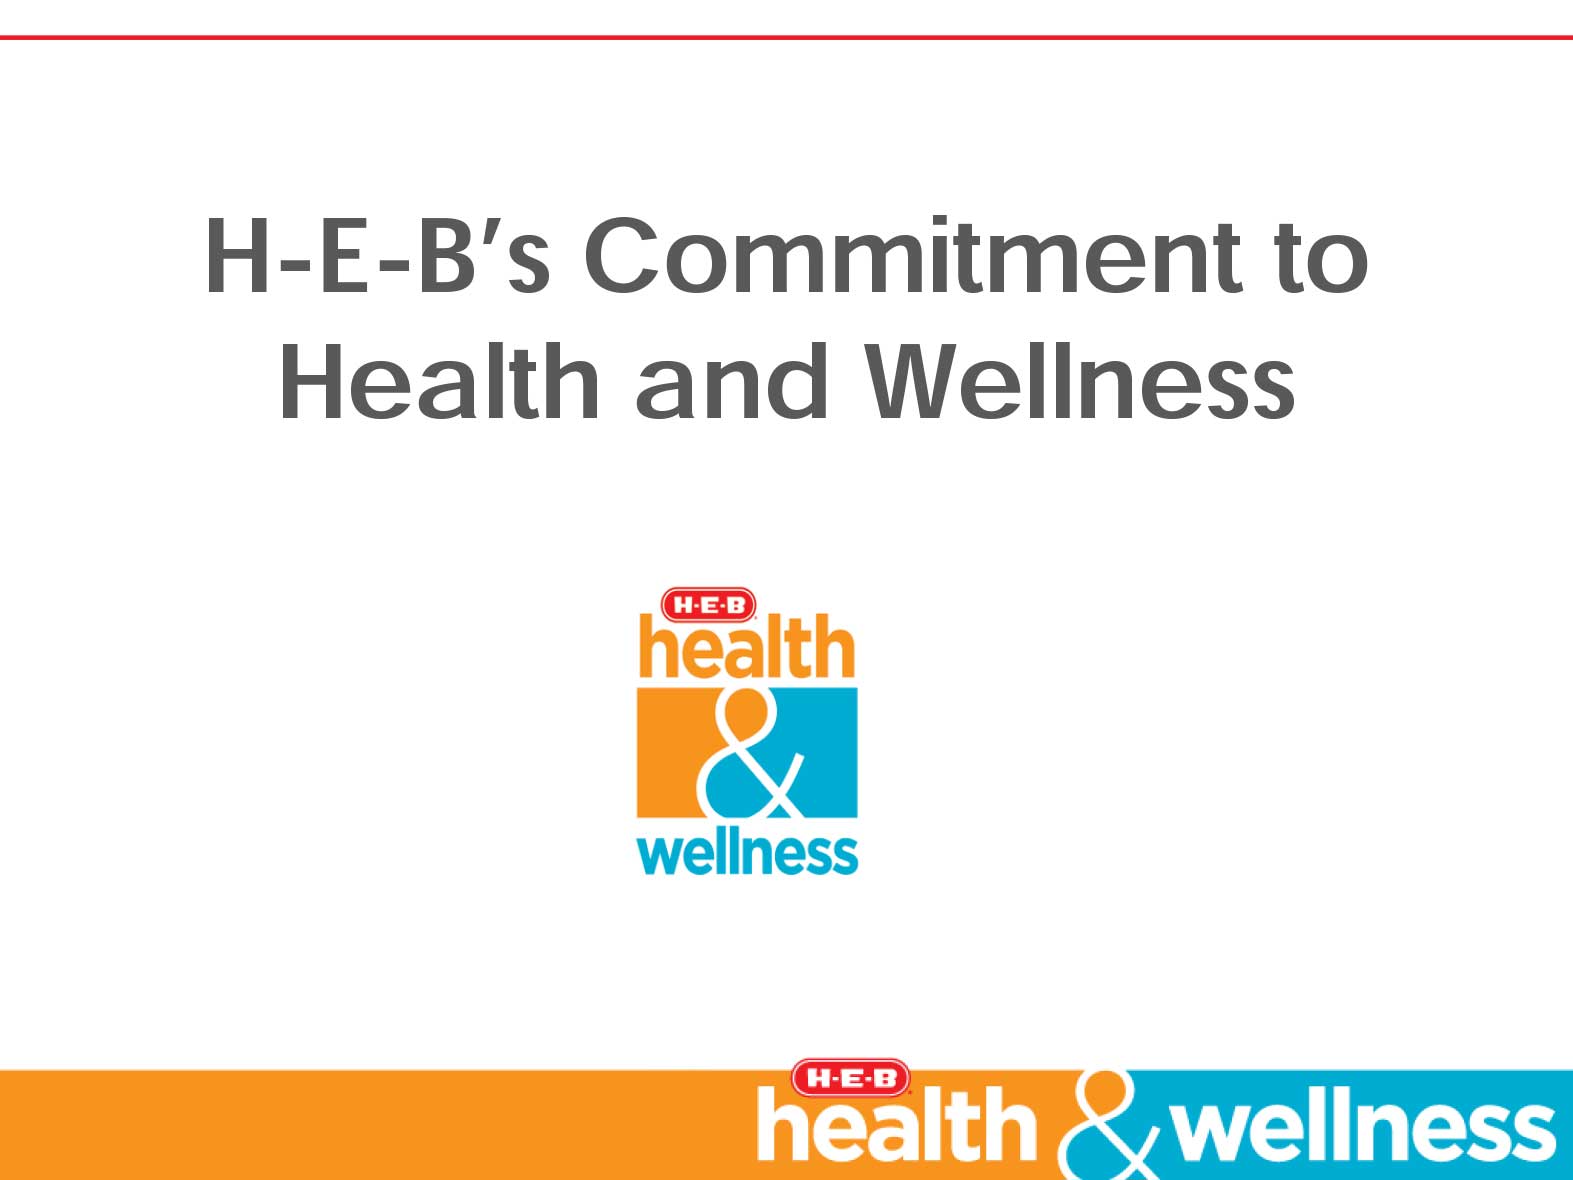 H-E-B’s Commitment to Health and Wellness